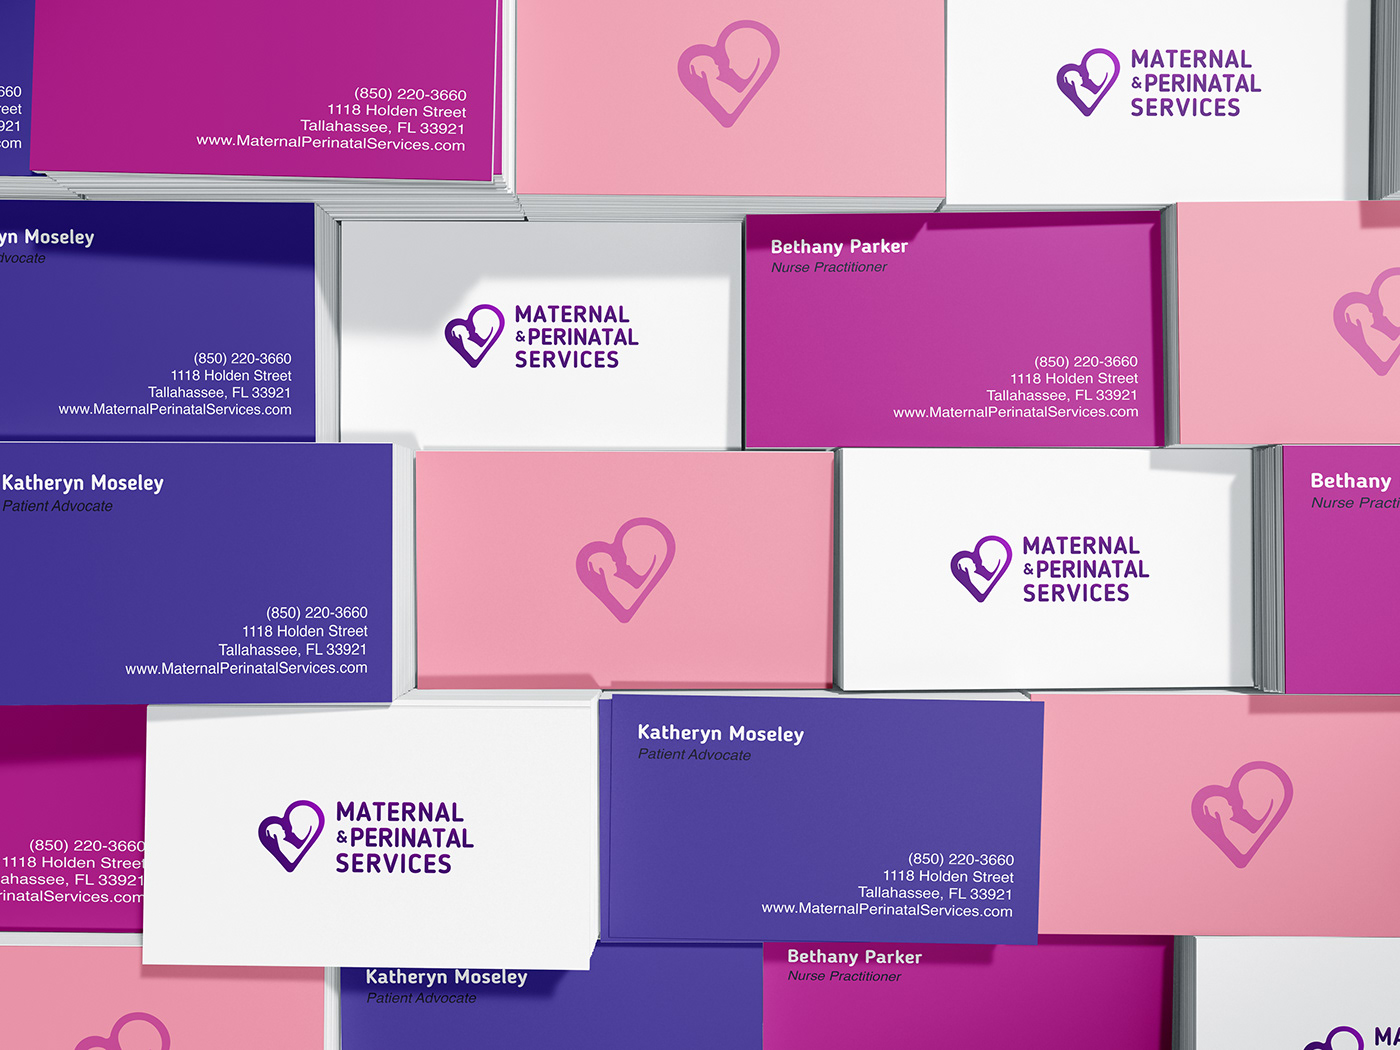 Maternal And Perinatal Services business card design.